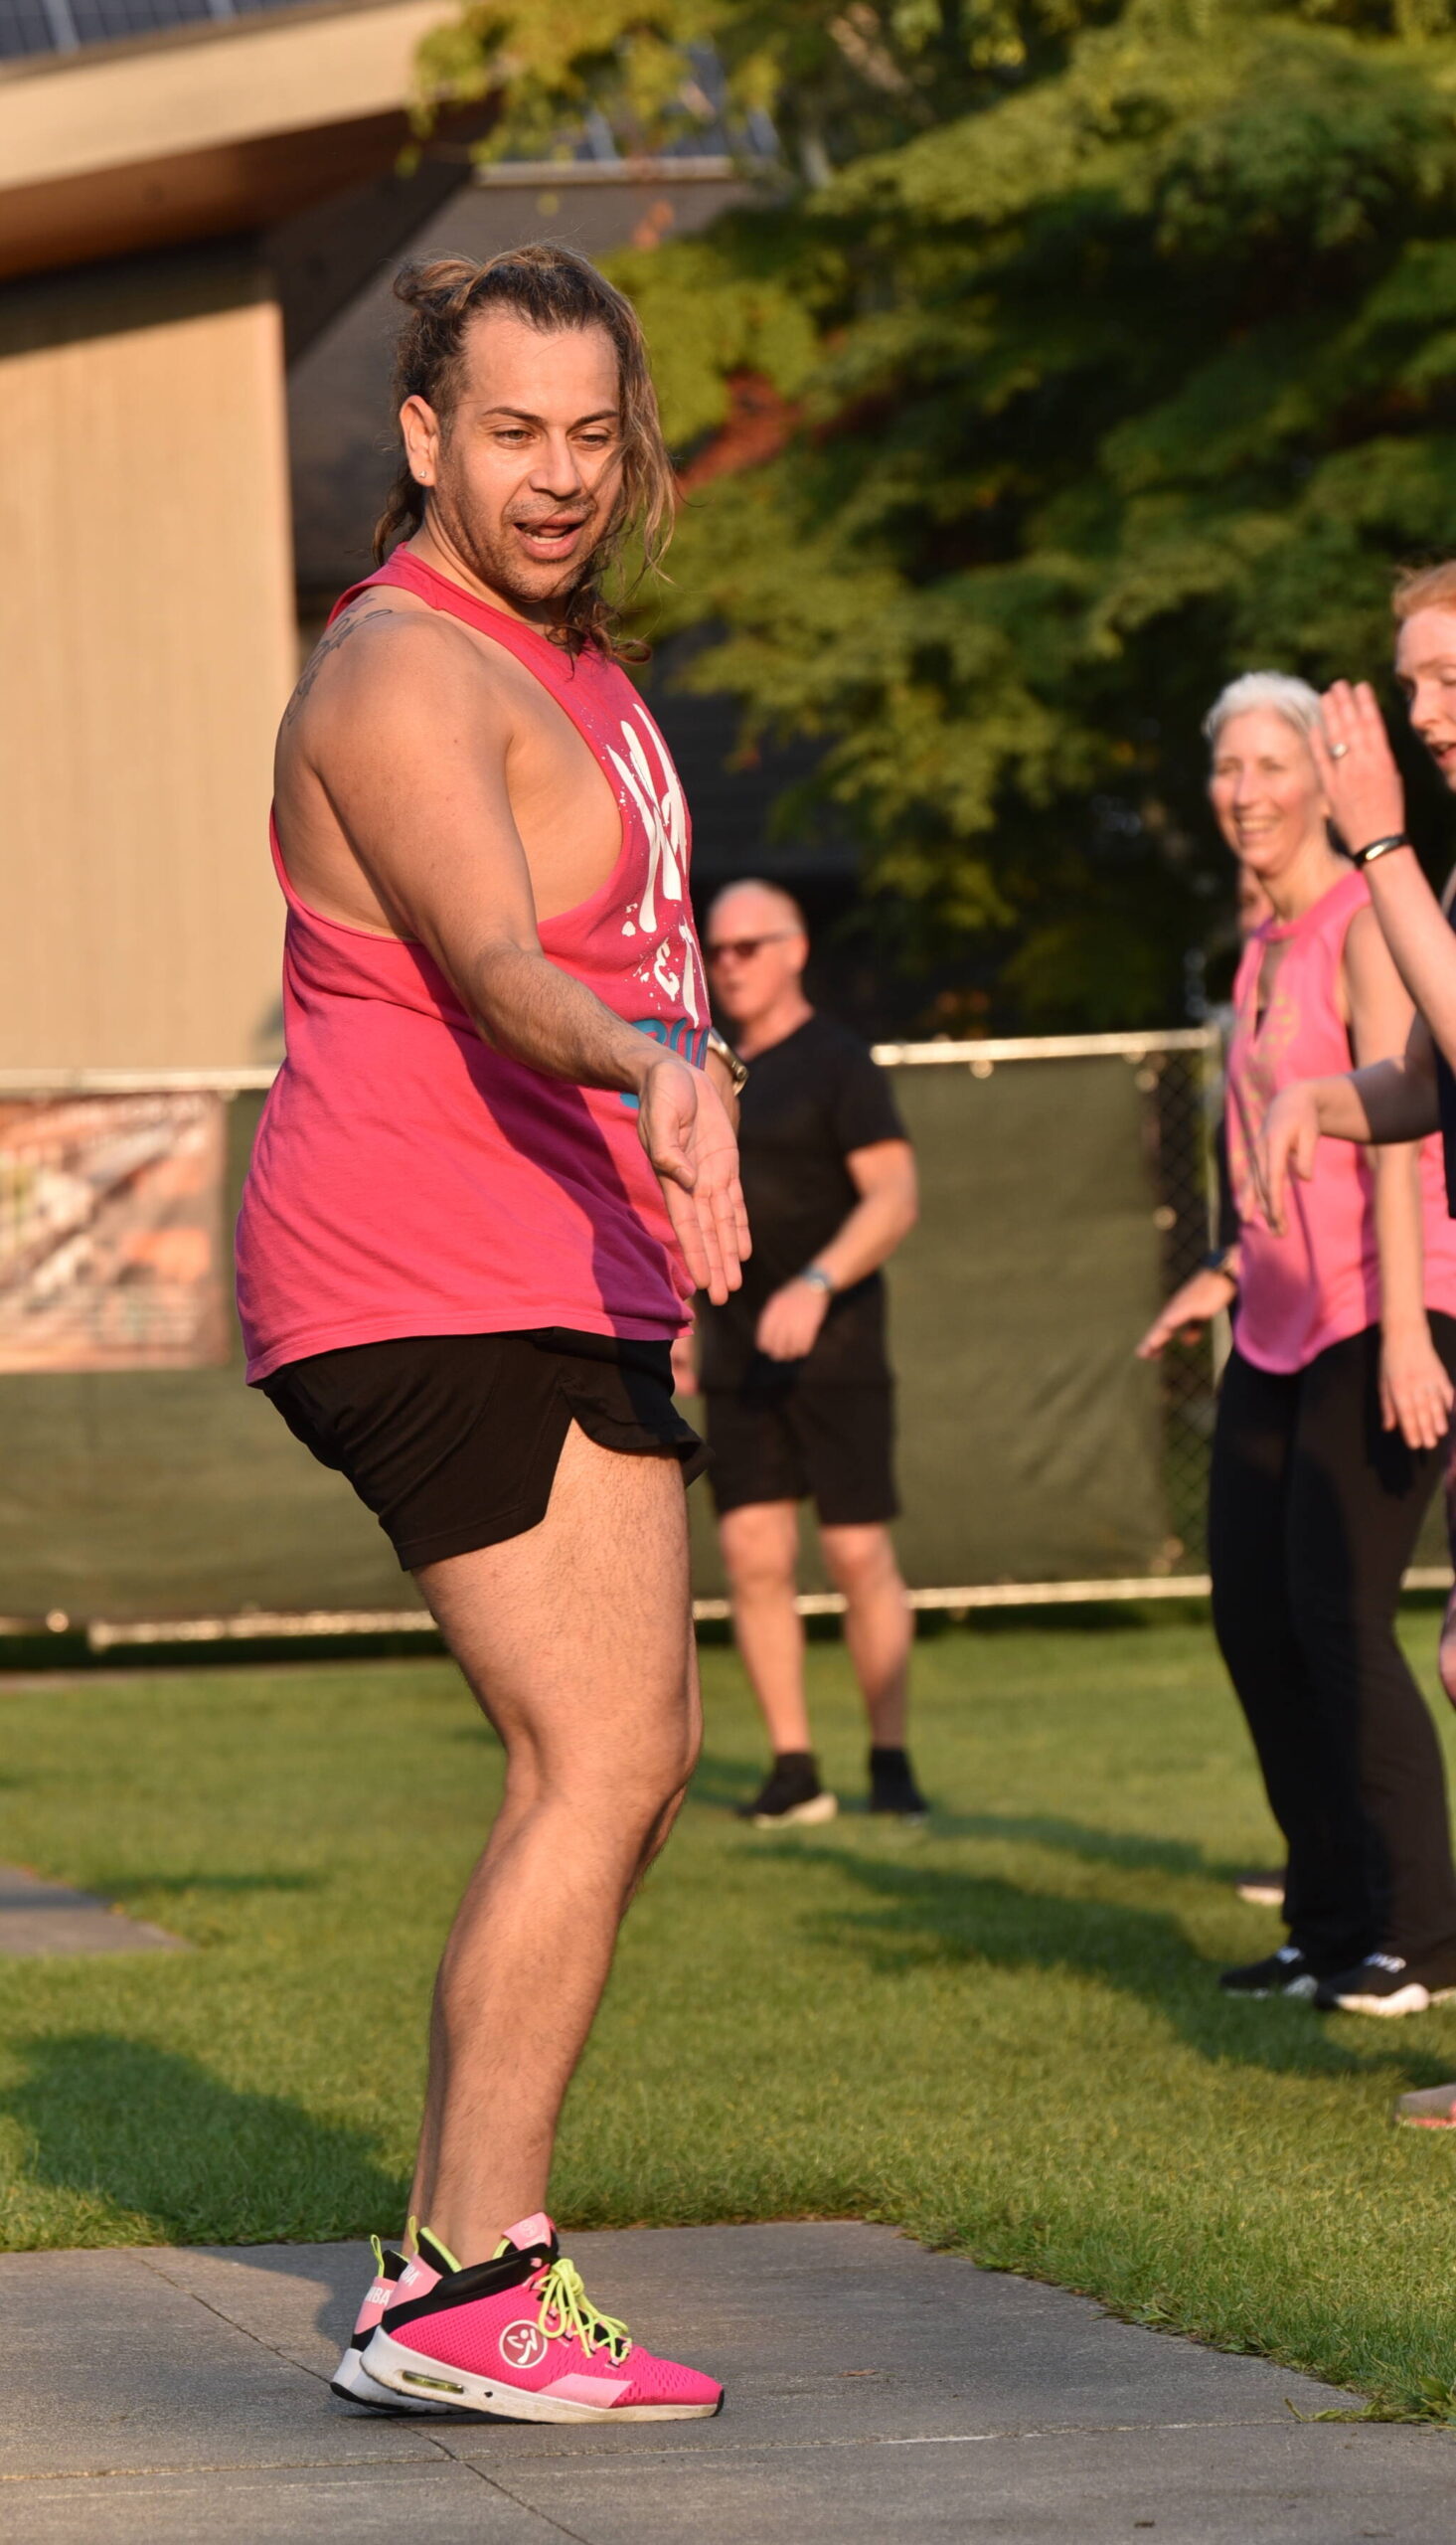 Josh Masters, Island Fitness instructor, leads an outdoor Zumba Dance for Maui fundraiser to benefit Maui-Strong. Masters’ mentor and instructor lost his Lahaina business in the fires.